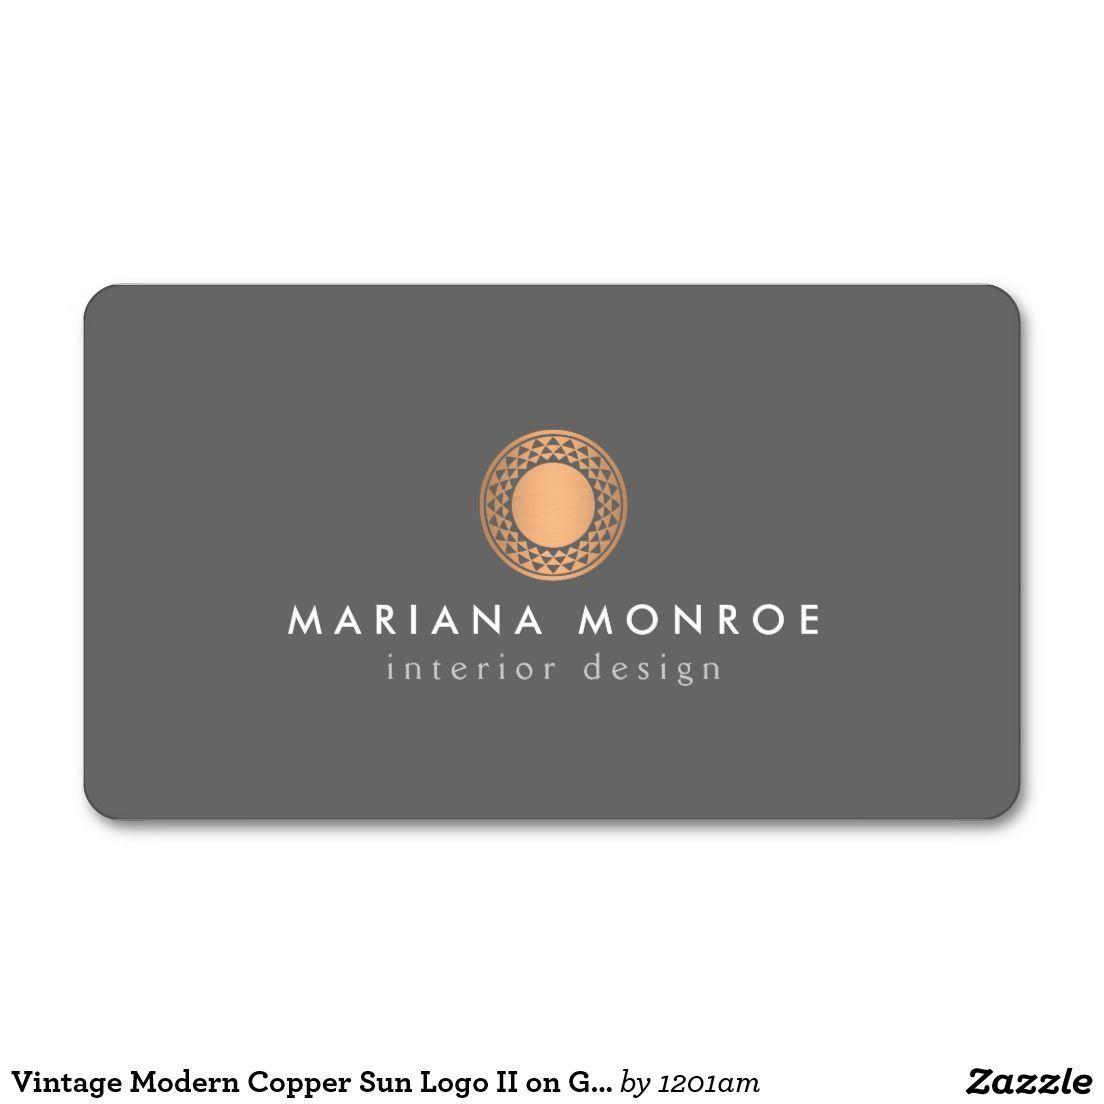 Copper and Gray Logo - Vintage Modern Copper Sun Logo II on Gray Business Card. Graphics